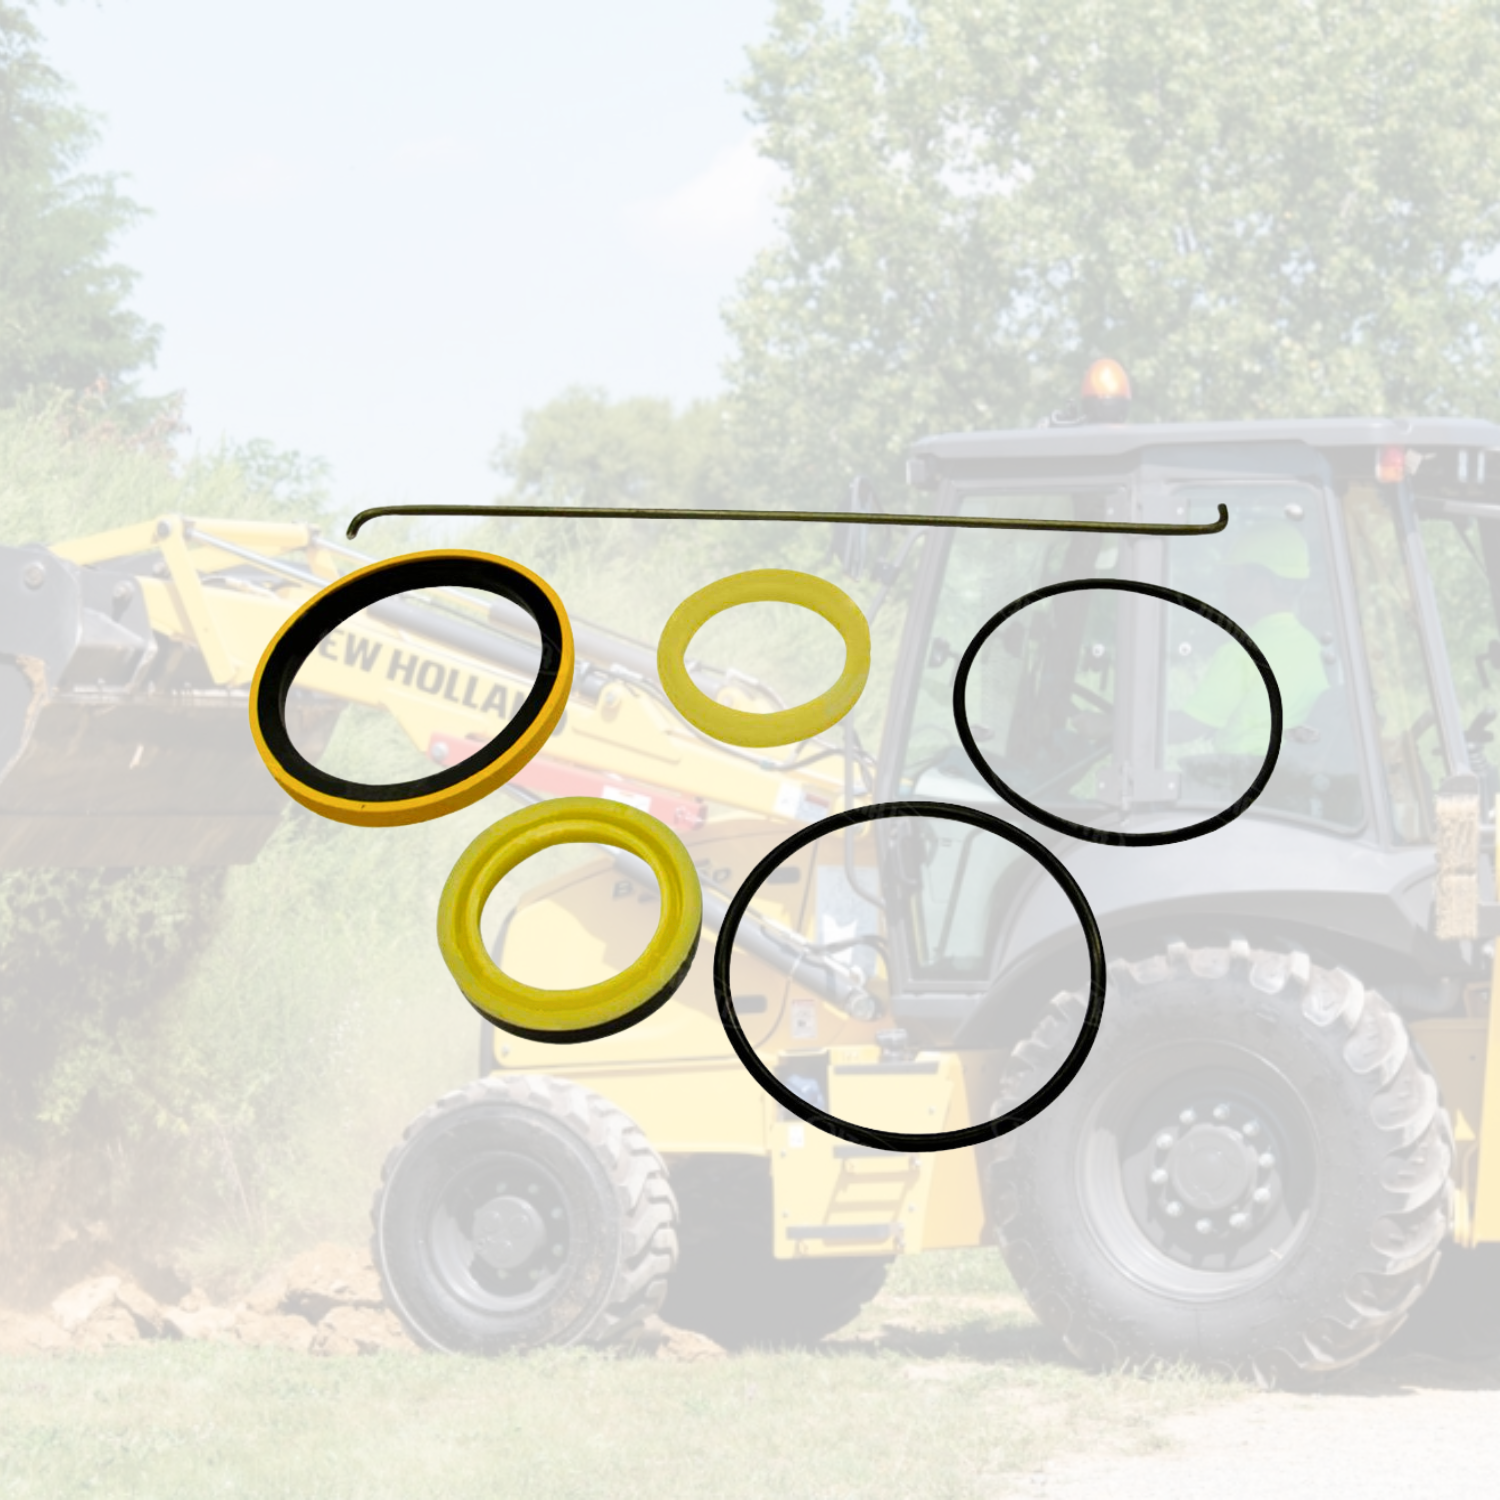 New Holland seal kits in stock now